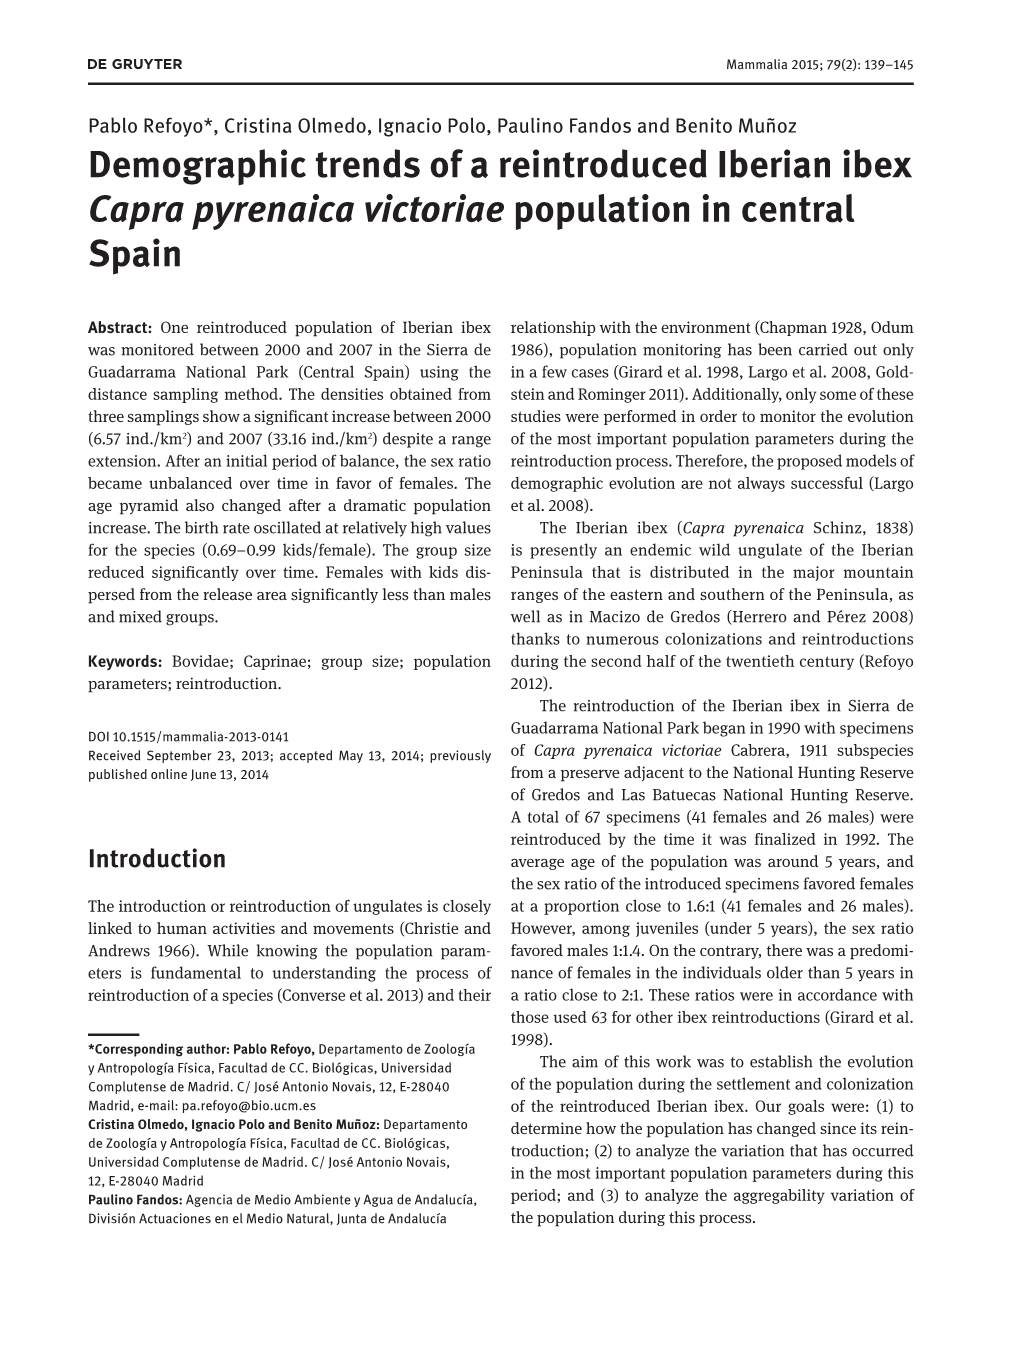 Demographic Trends of a Reintroduced Iberian Ibex Capra Pyrenaica Victoriae Population in Central Spain